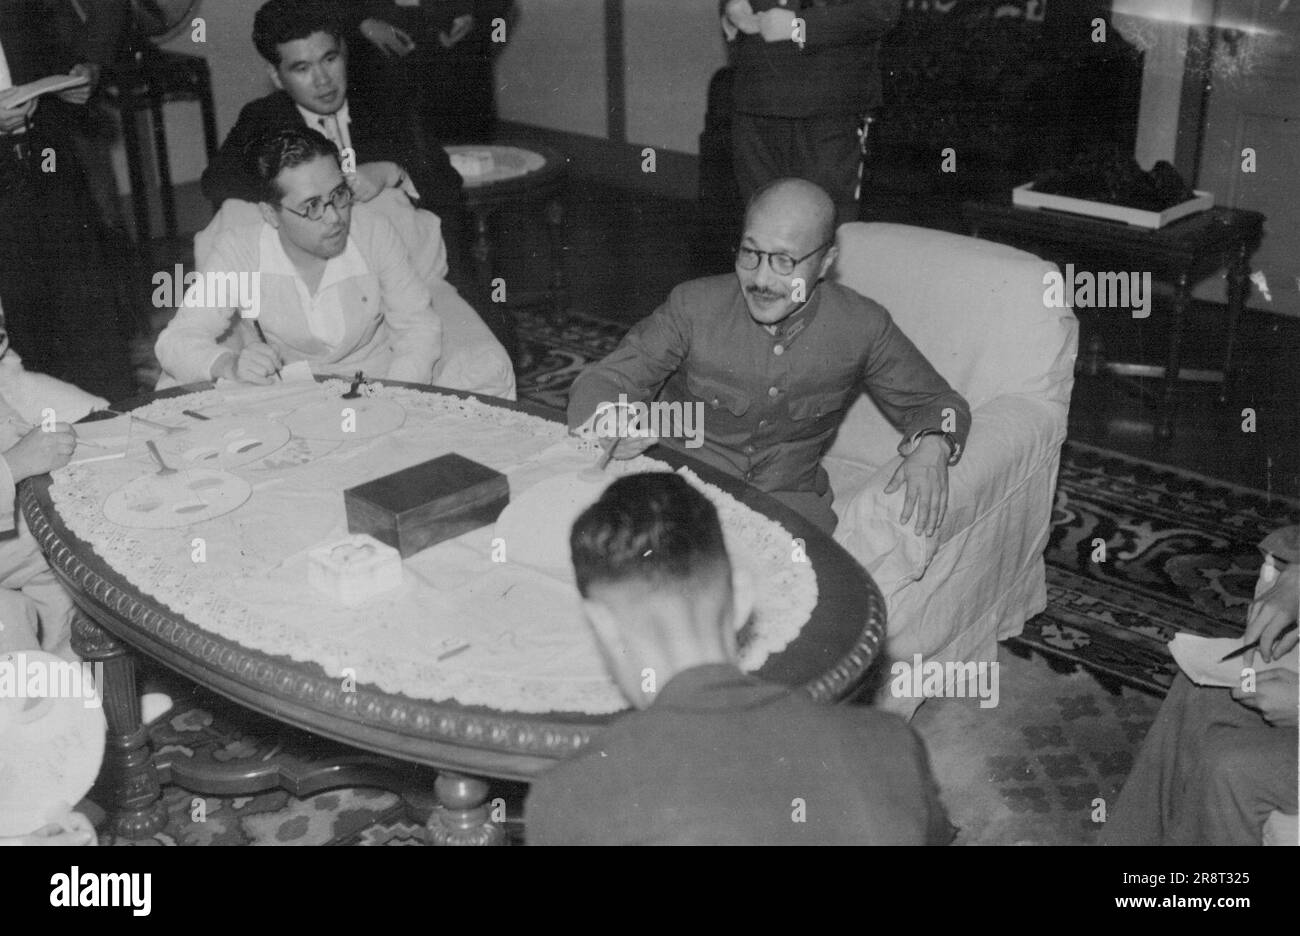 General Tojo ... Lt. General Tojo, War Minister designate, was taken at the army minister's official residence late tonight, where he talked about important matters with high army officials, as making his statement. July 18, 1940. (Photo by The Domei News Photos Service). Stock Photo